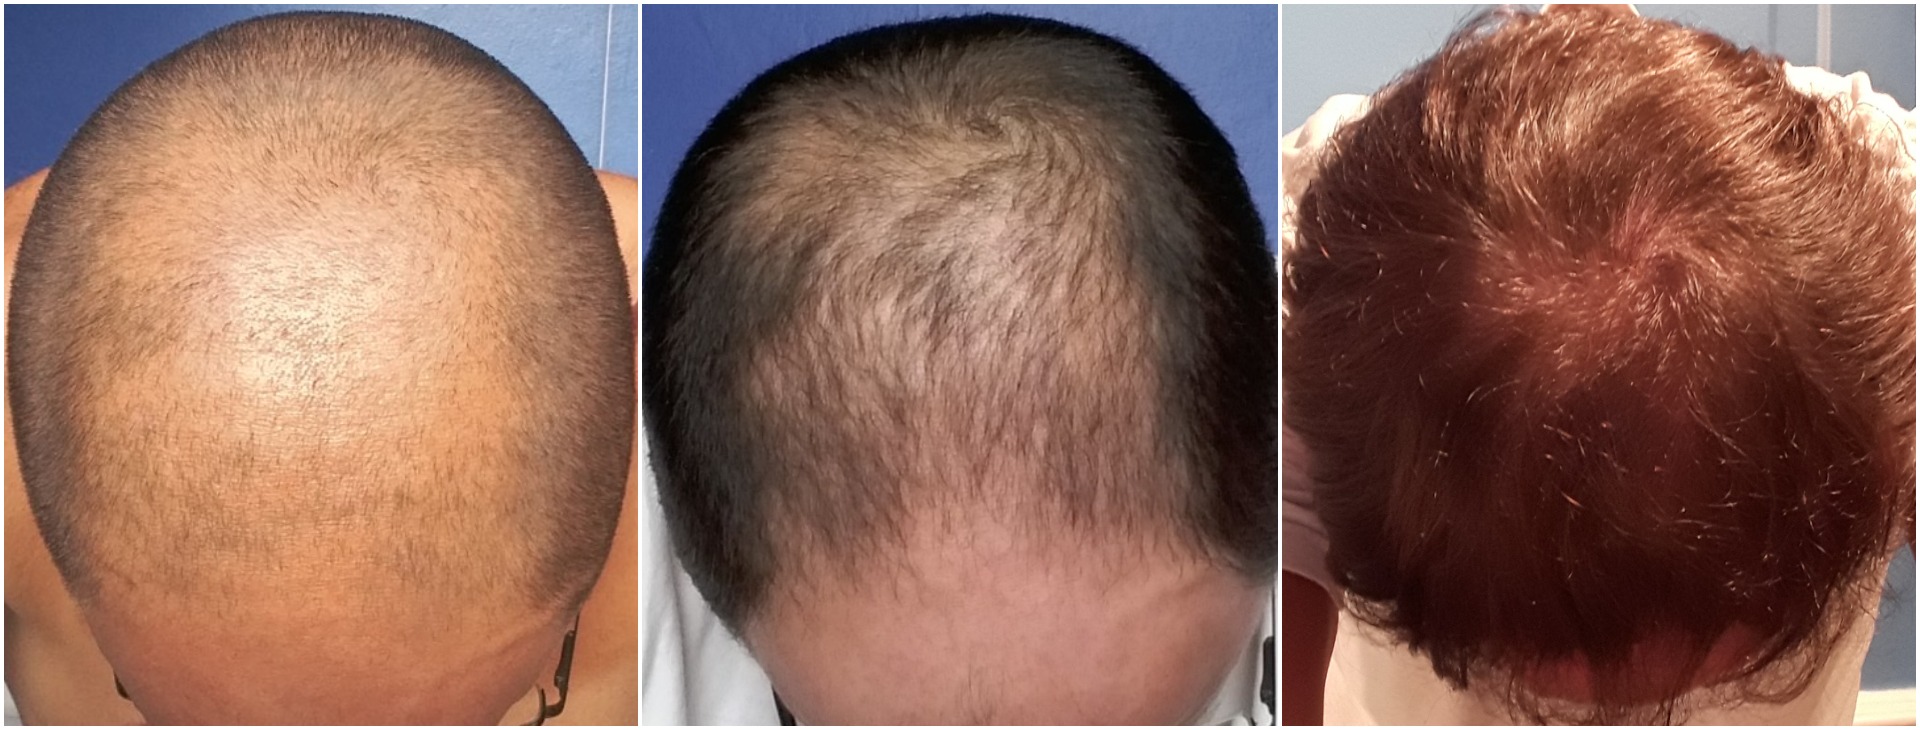 Hair restoration is working – it’s official!